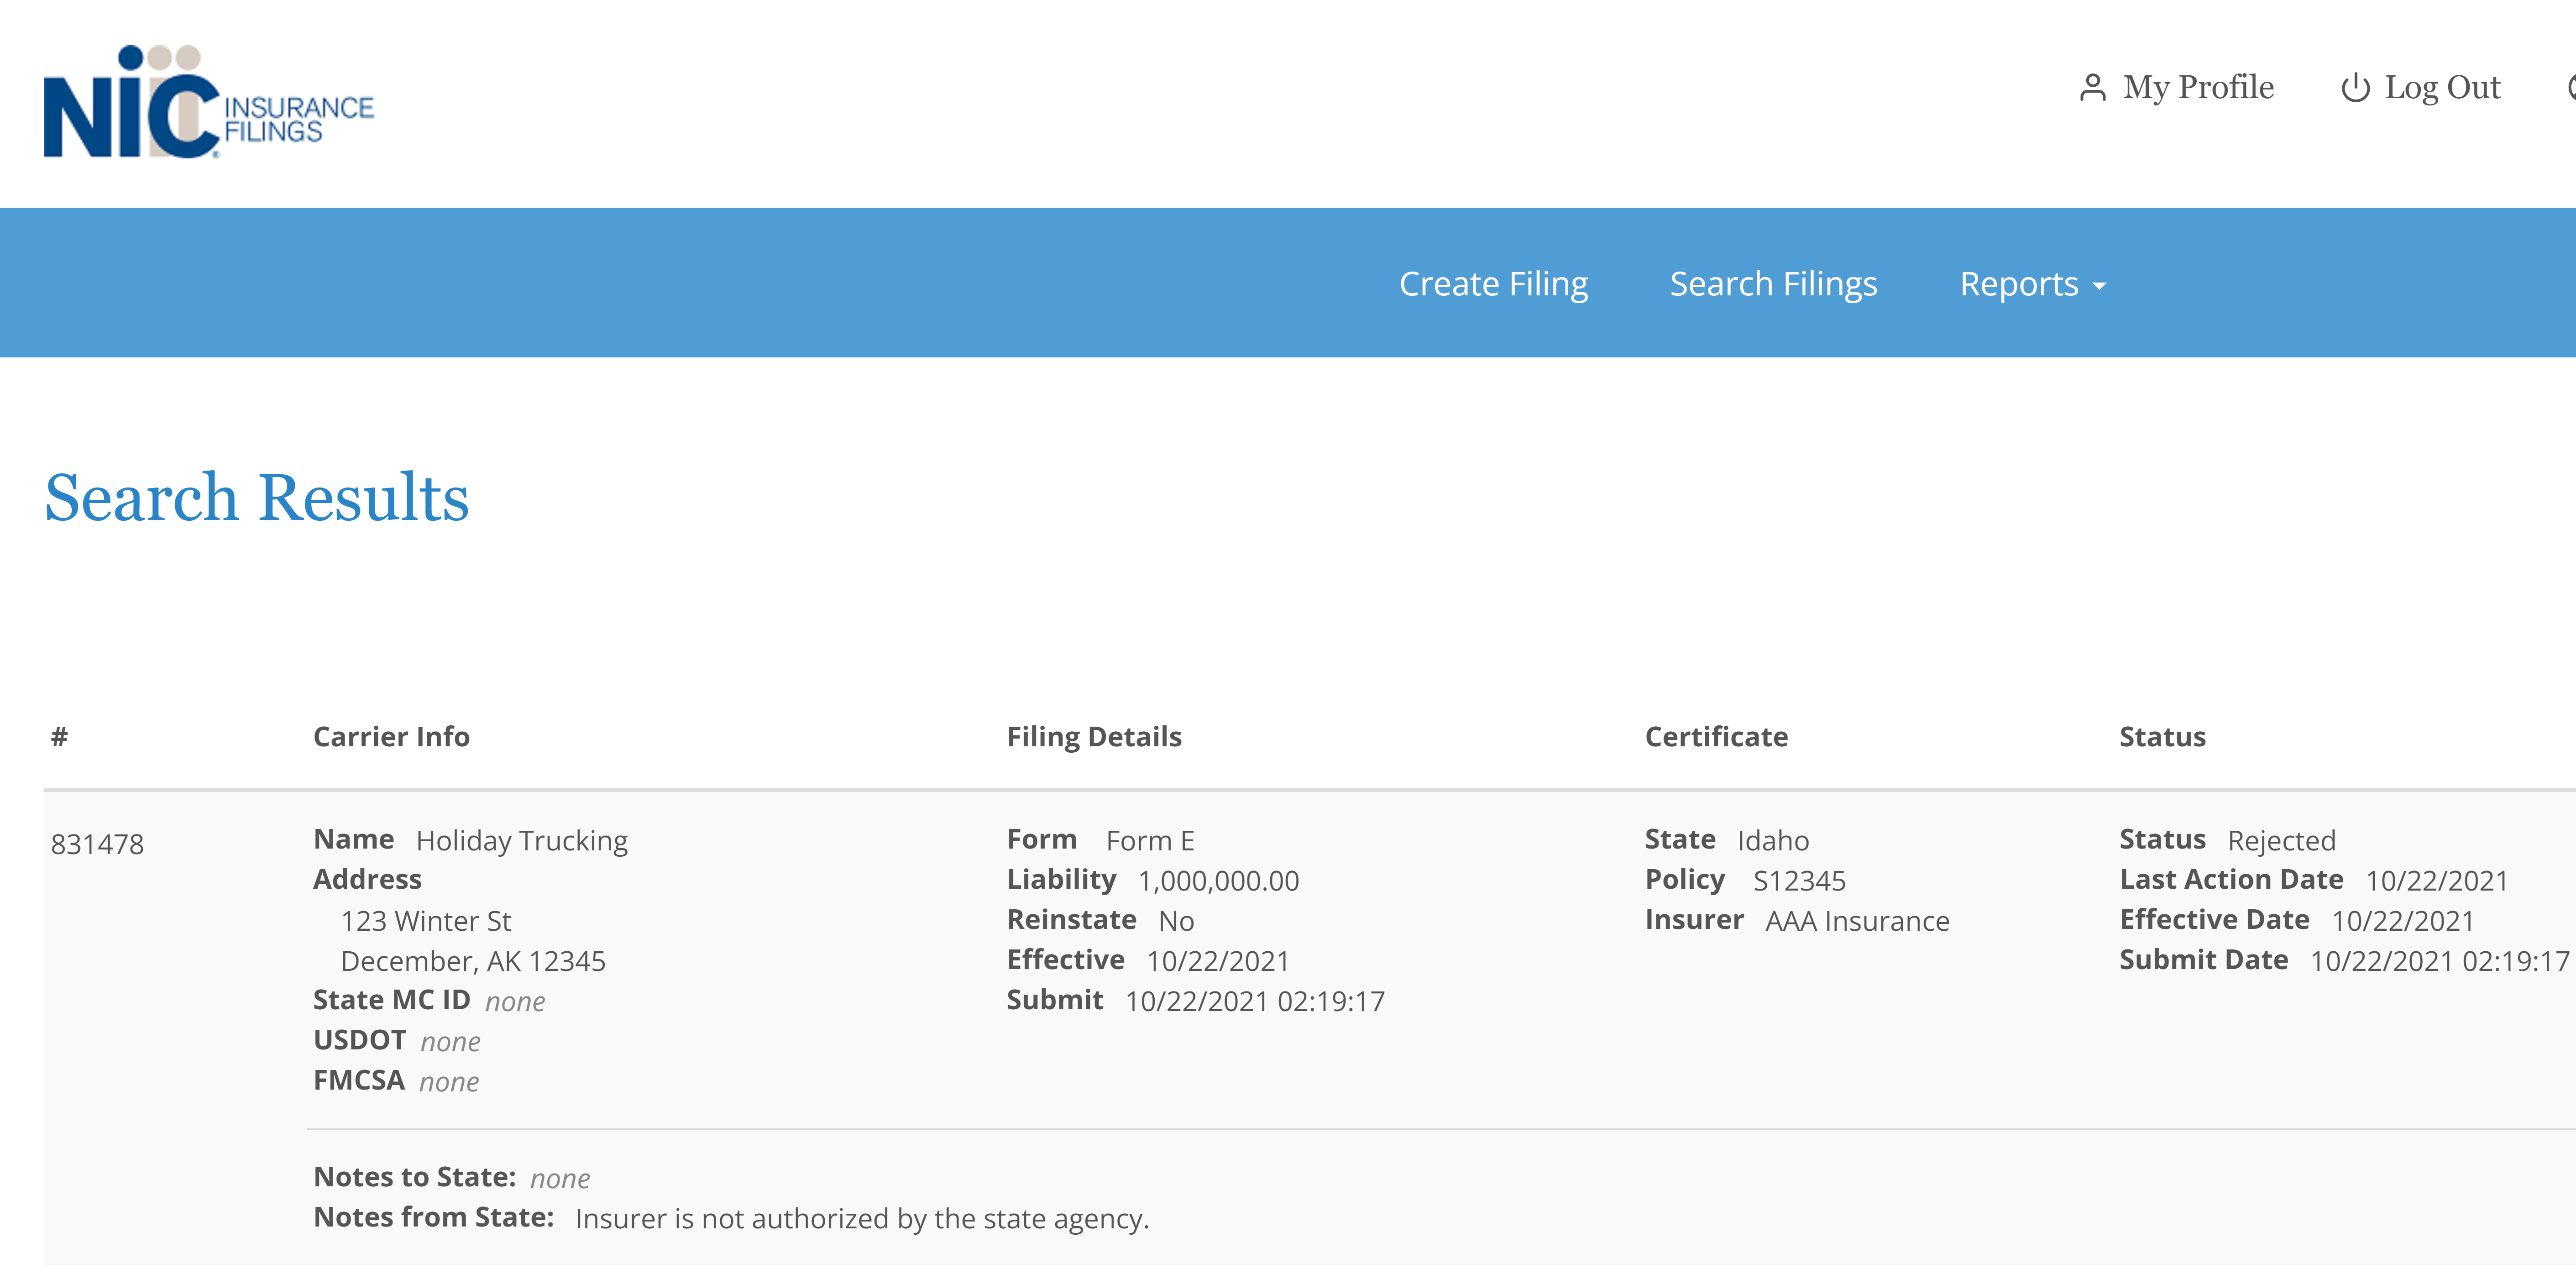 Screenshot of NIC Insurance Filings Search Results page.